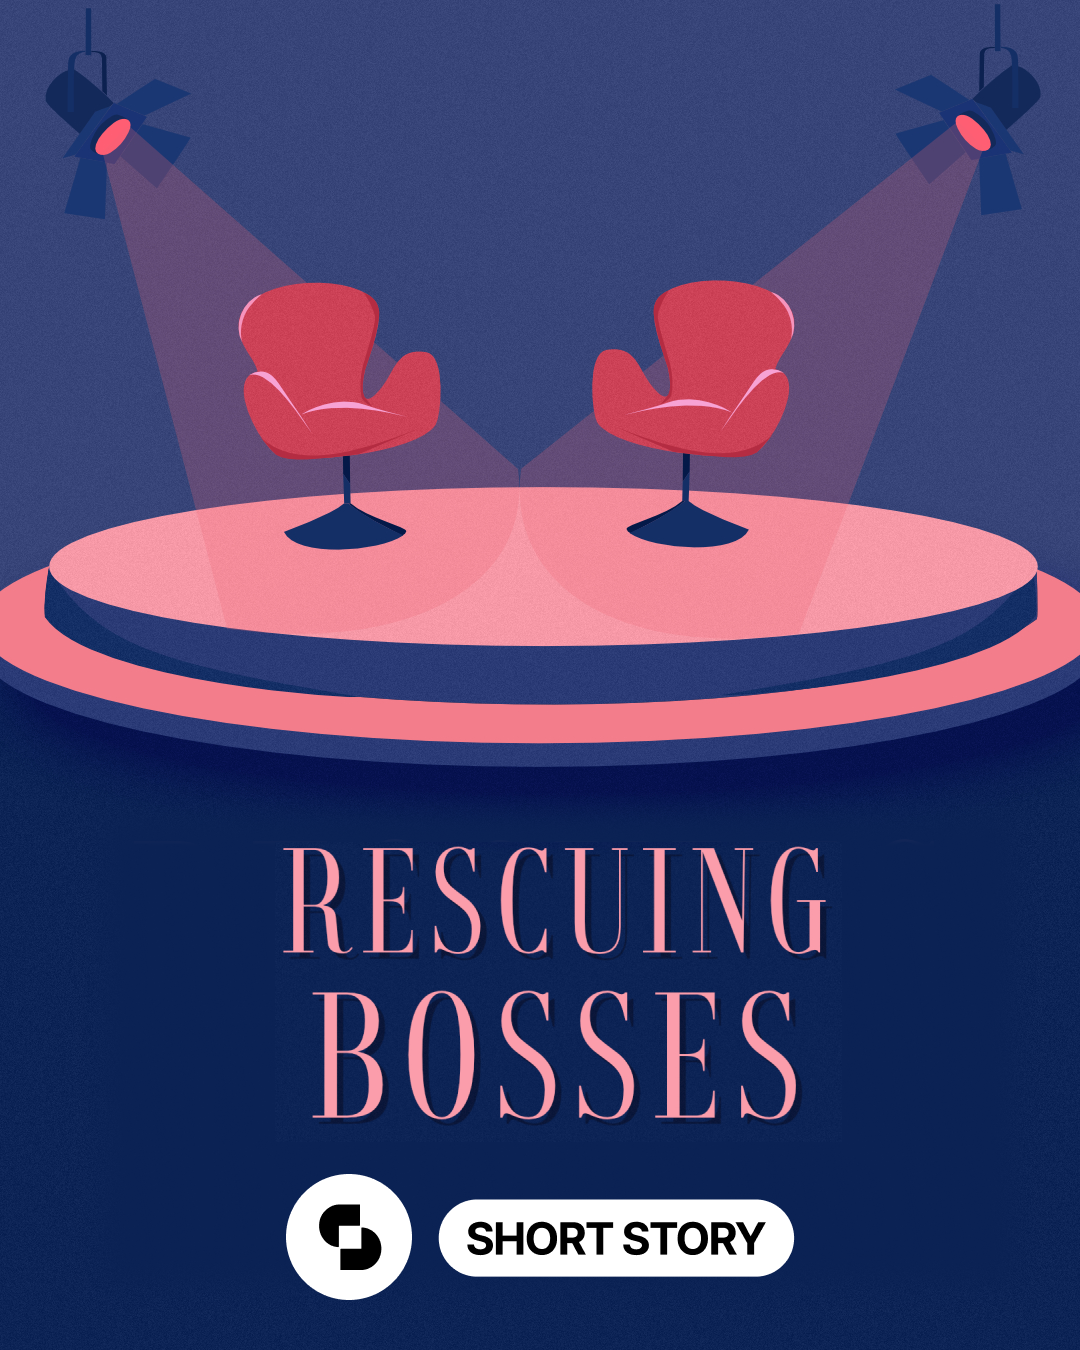 Rescuing Bosses story poster